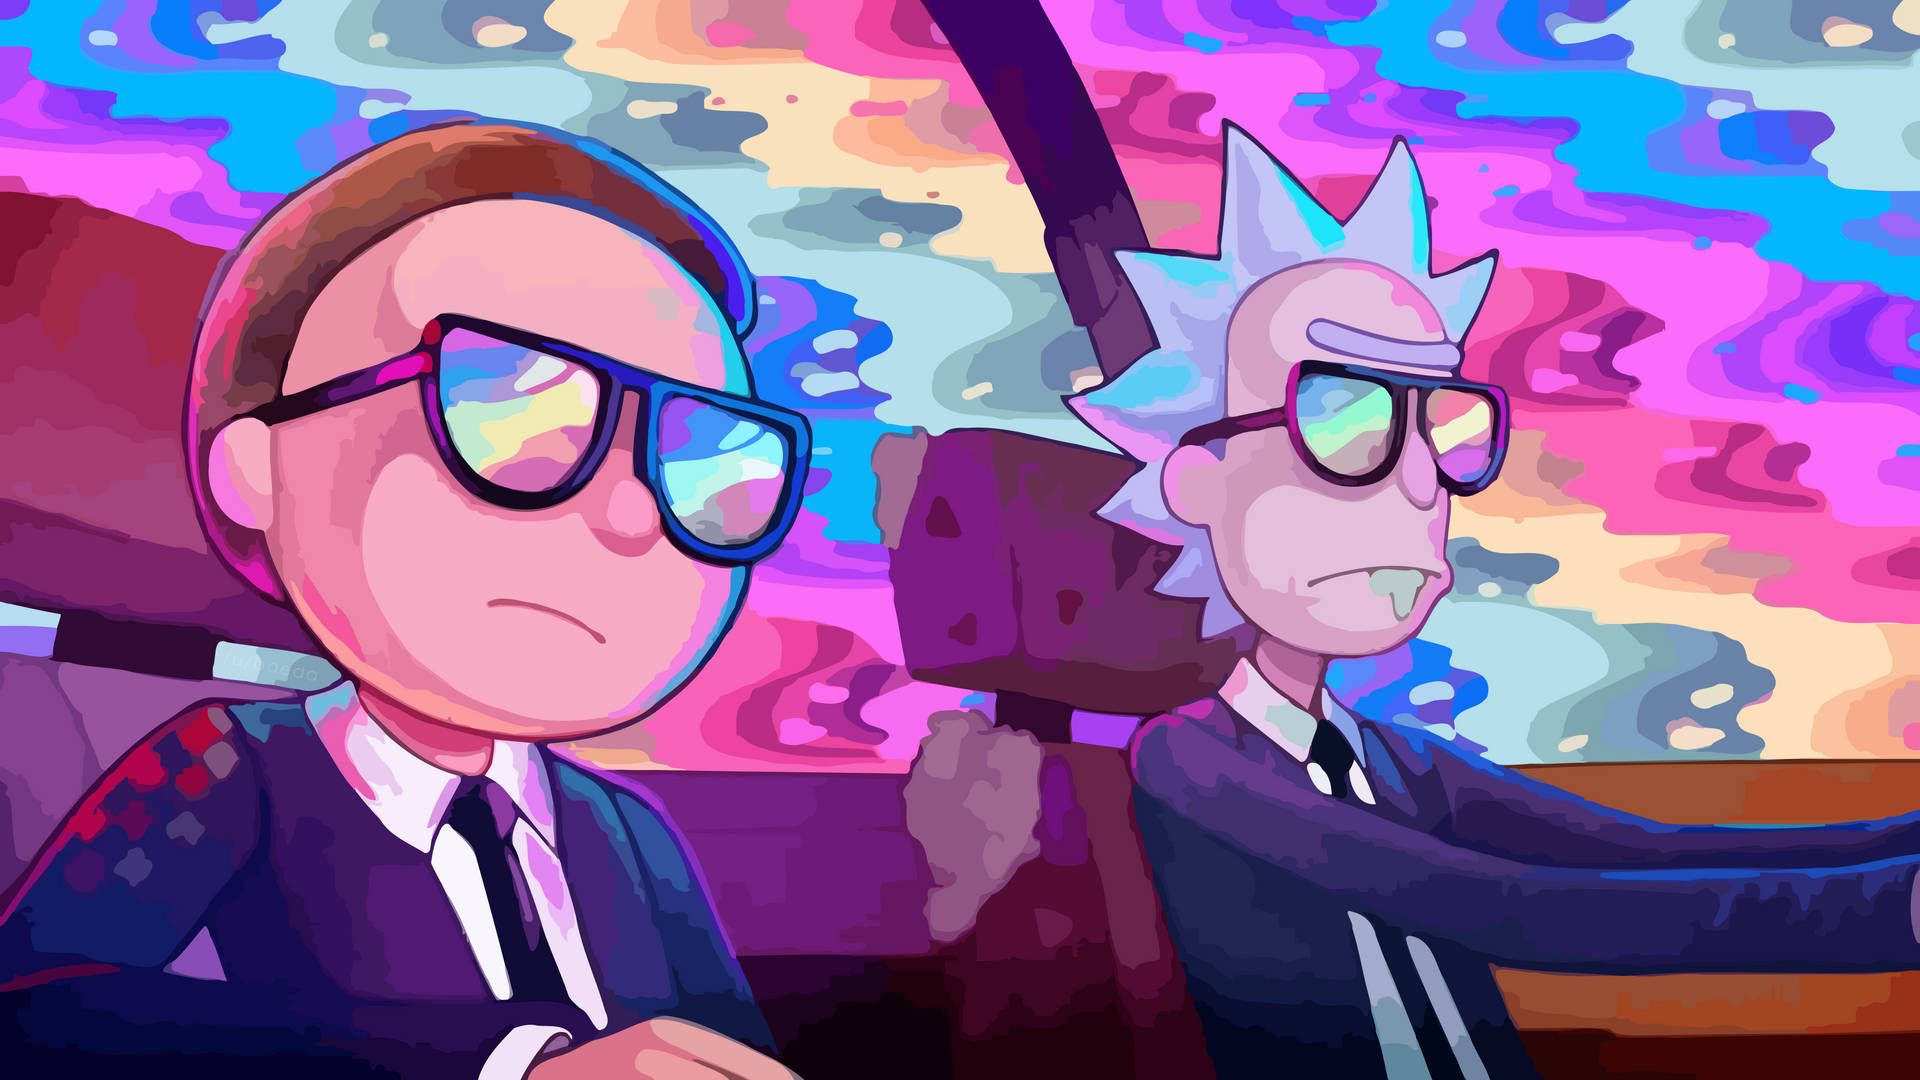 Trippy Rick And Morty PC 4K Wallpaper